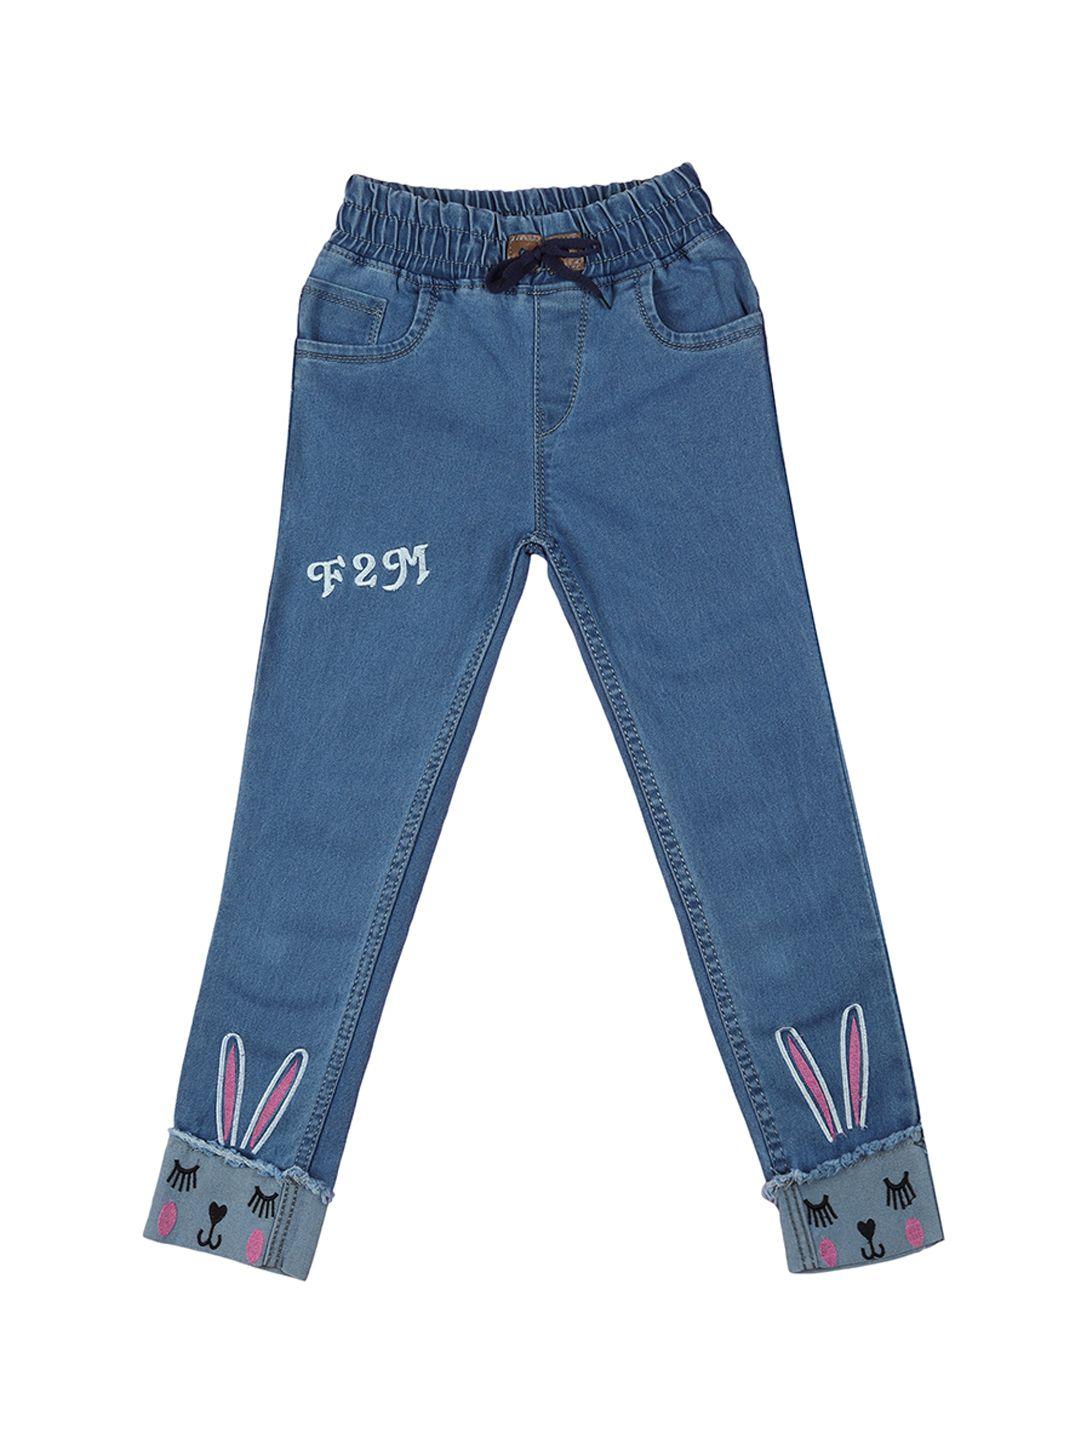 a-okay unisex kids blue jogger embroidered jeans